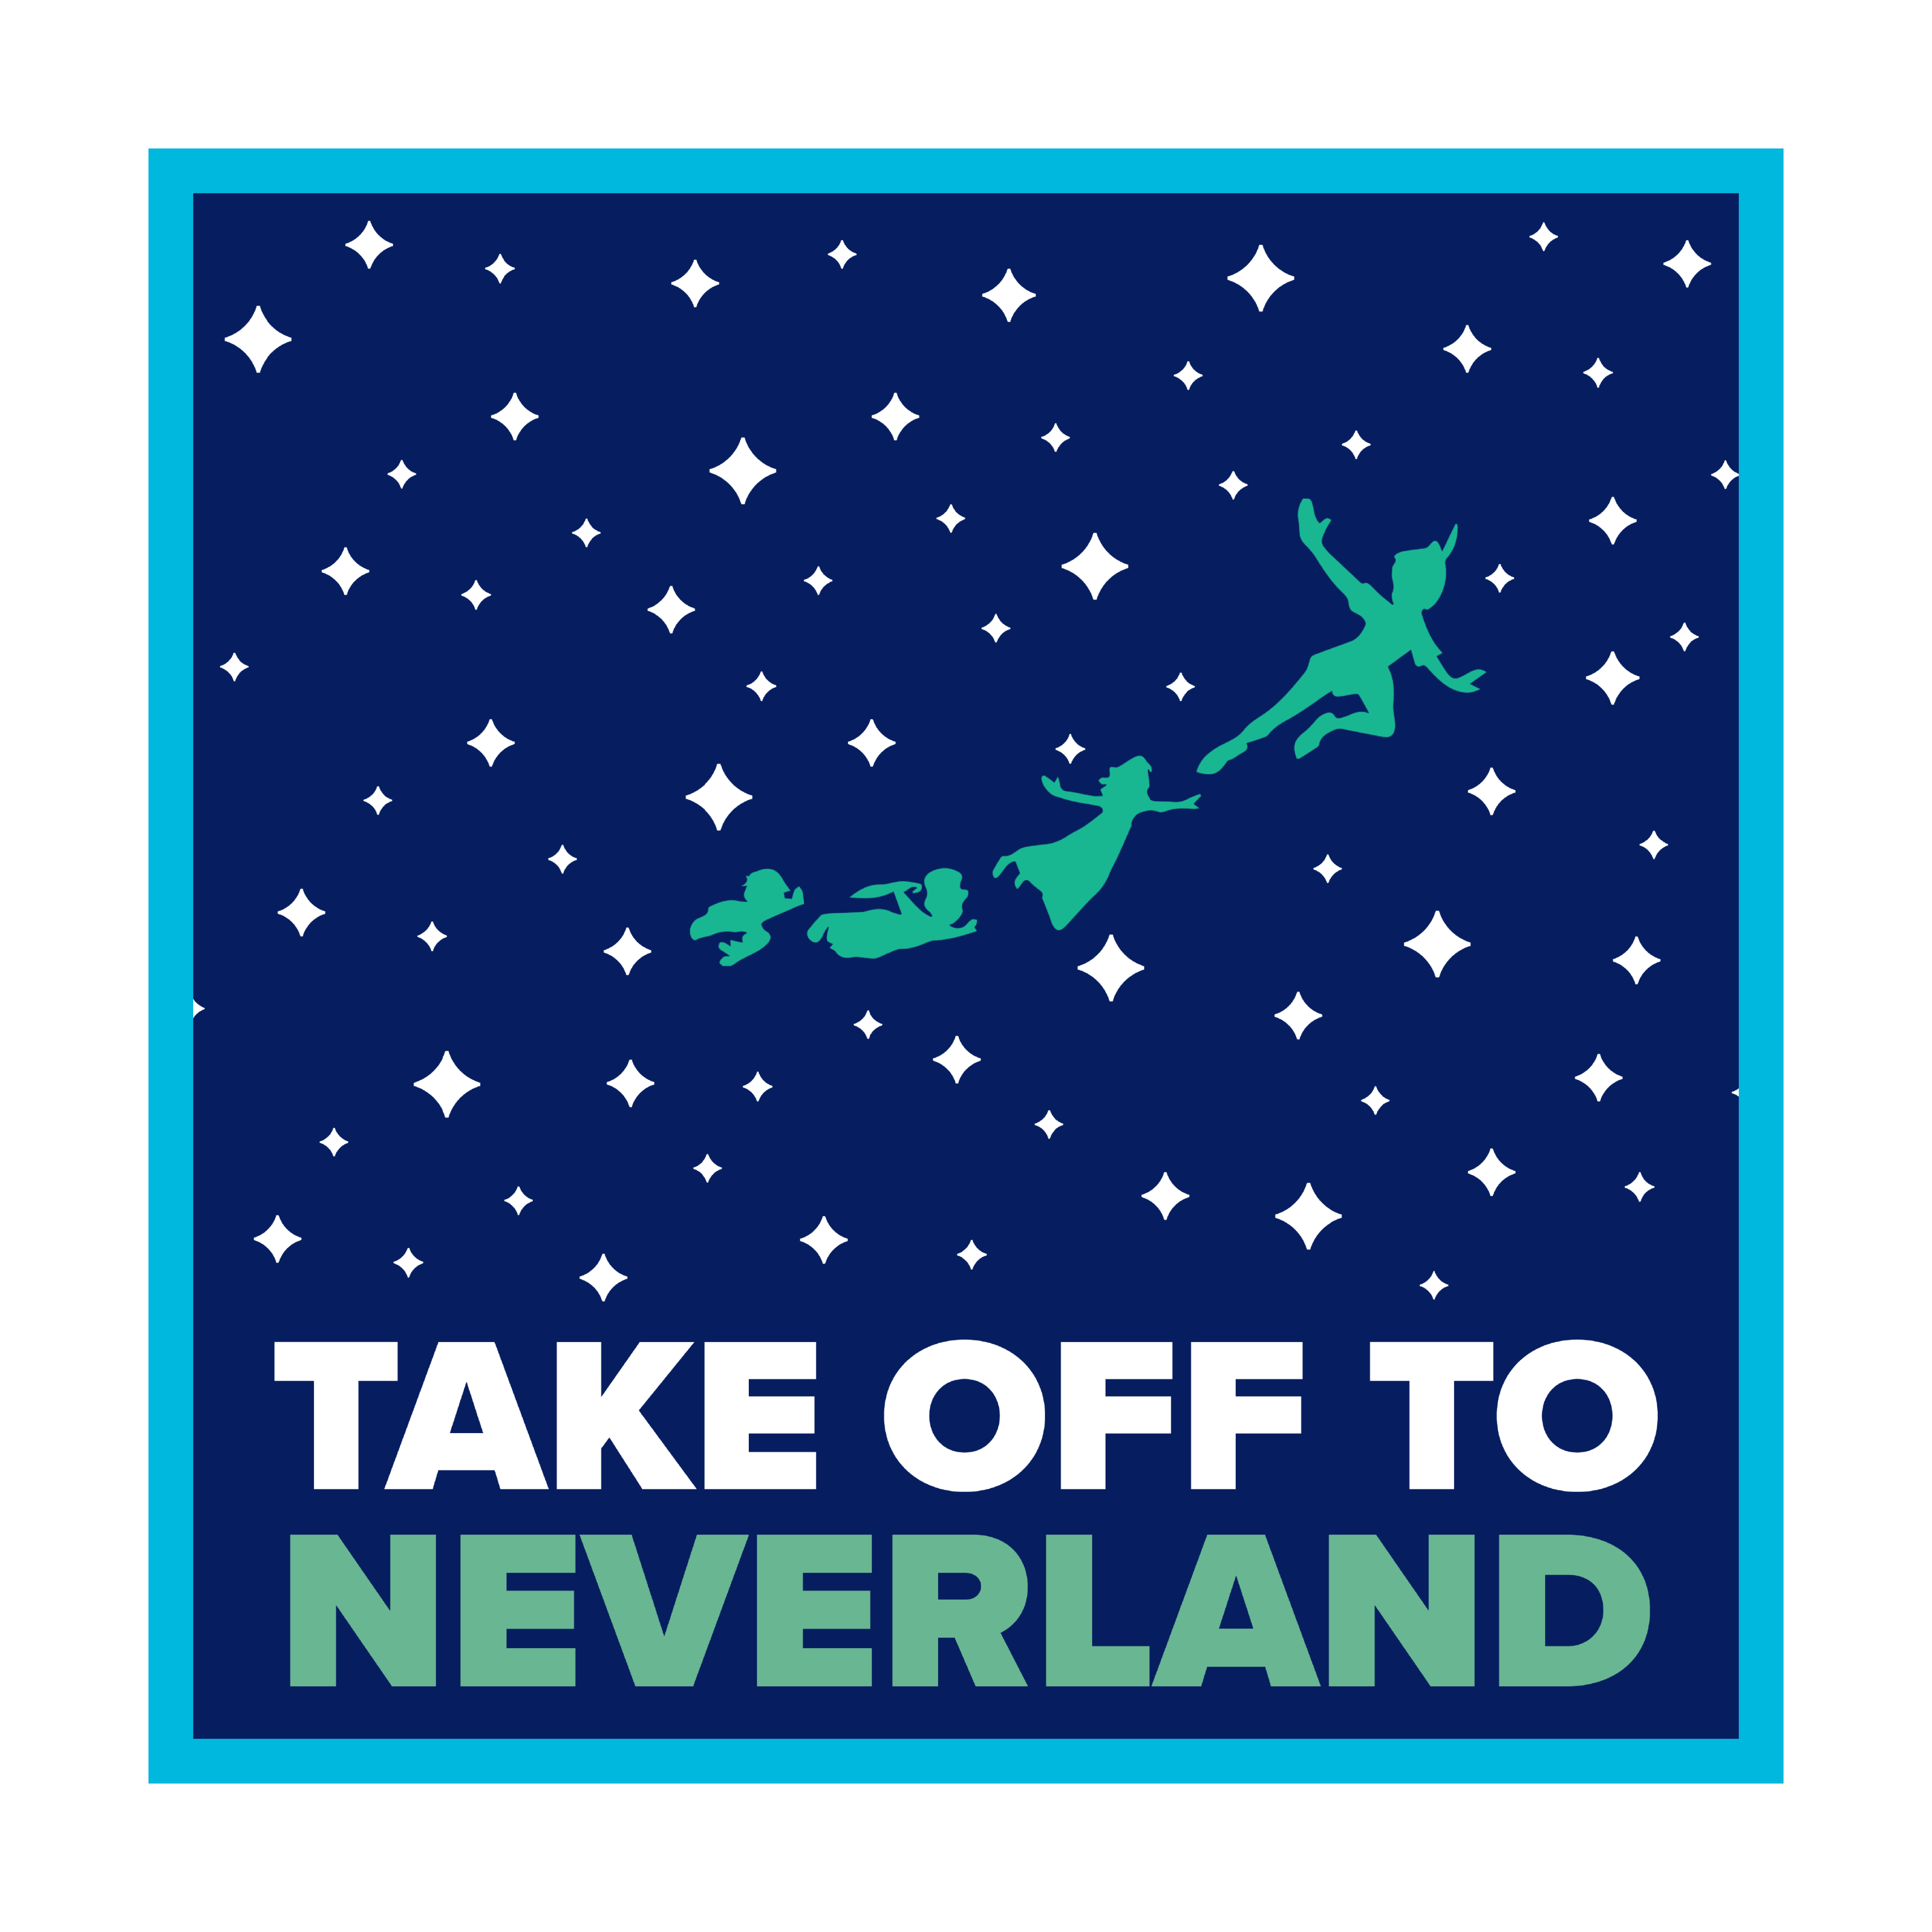 Take off to Neverland